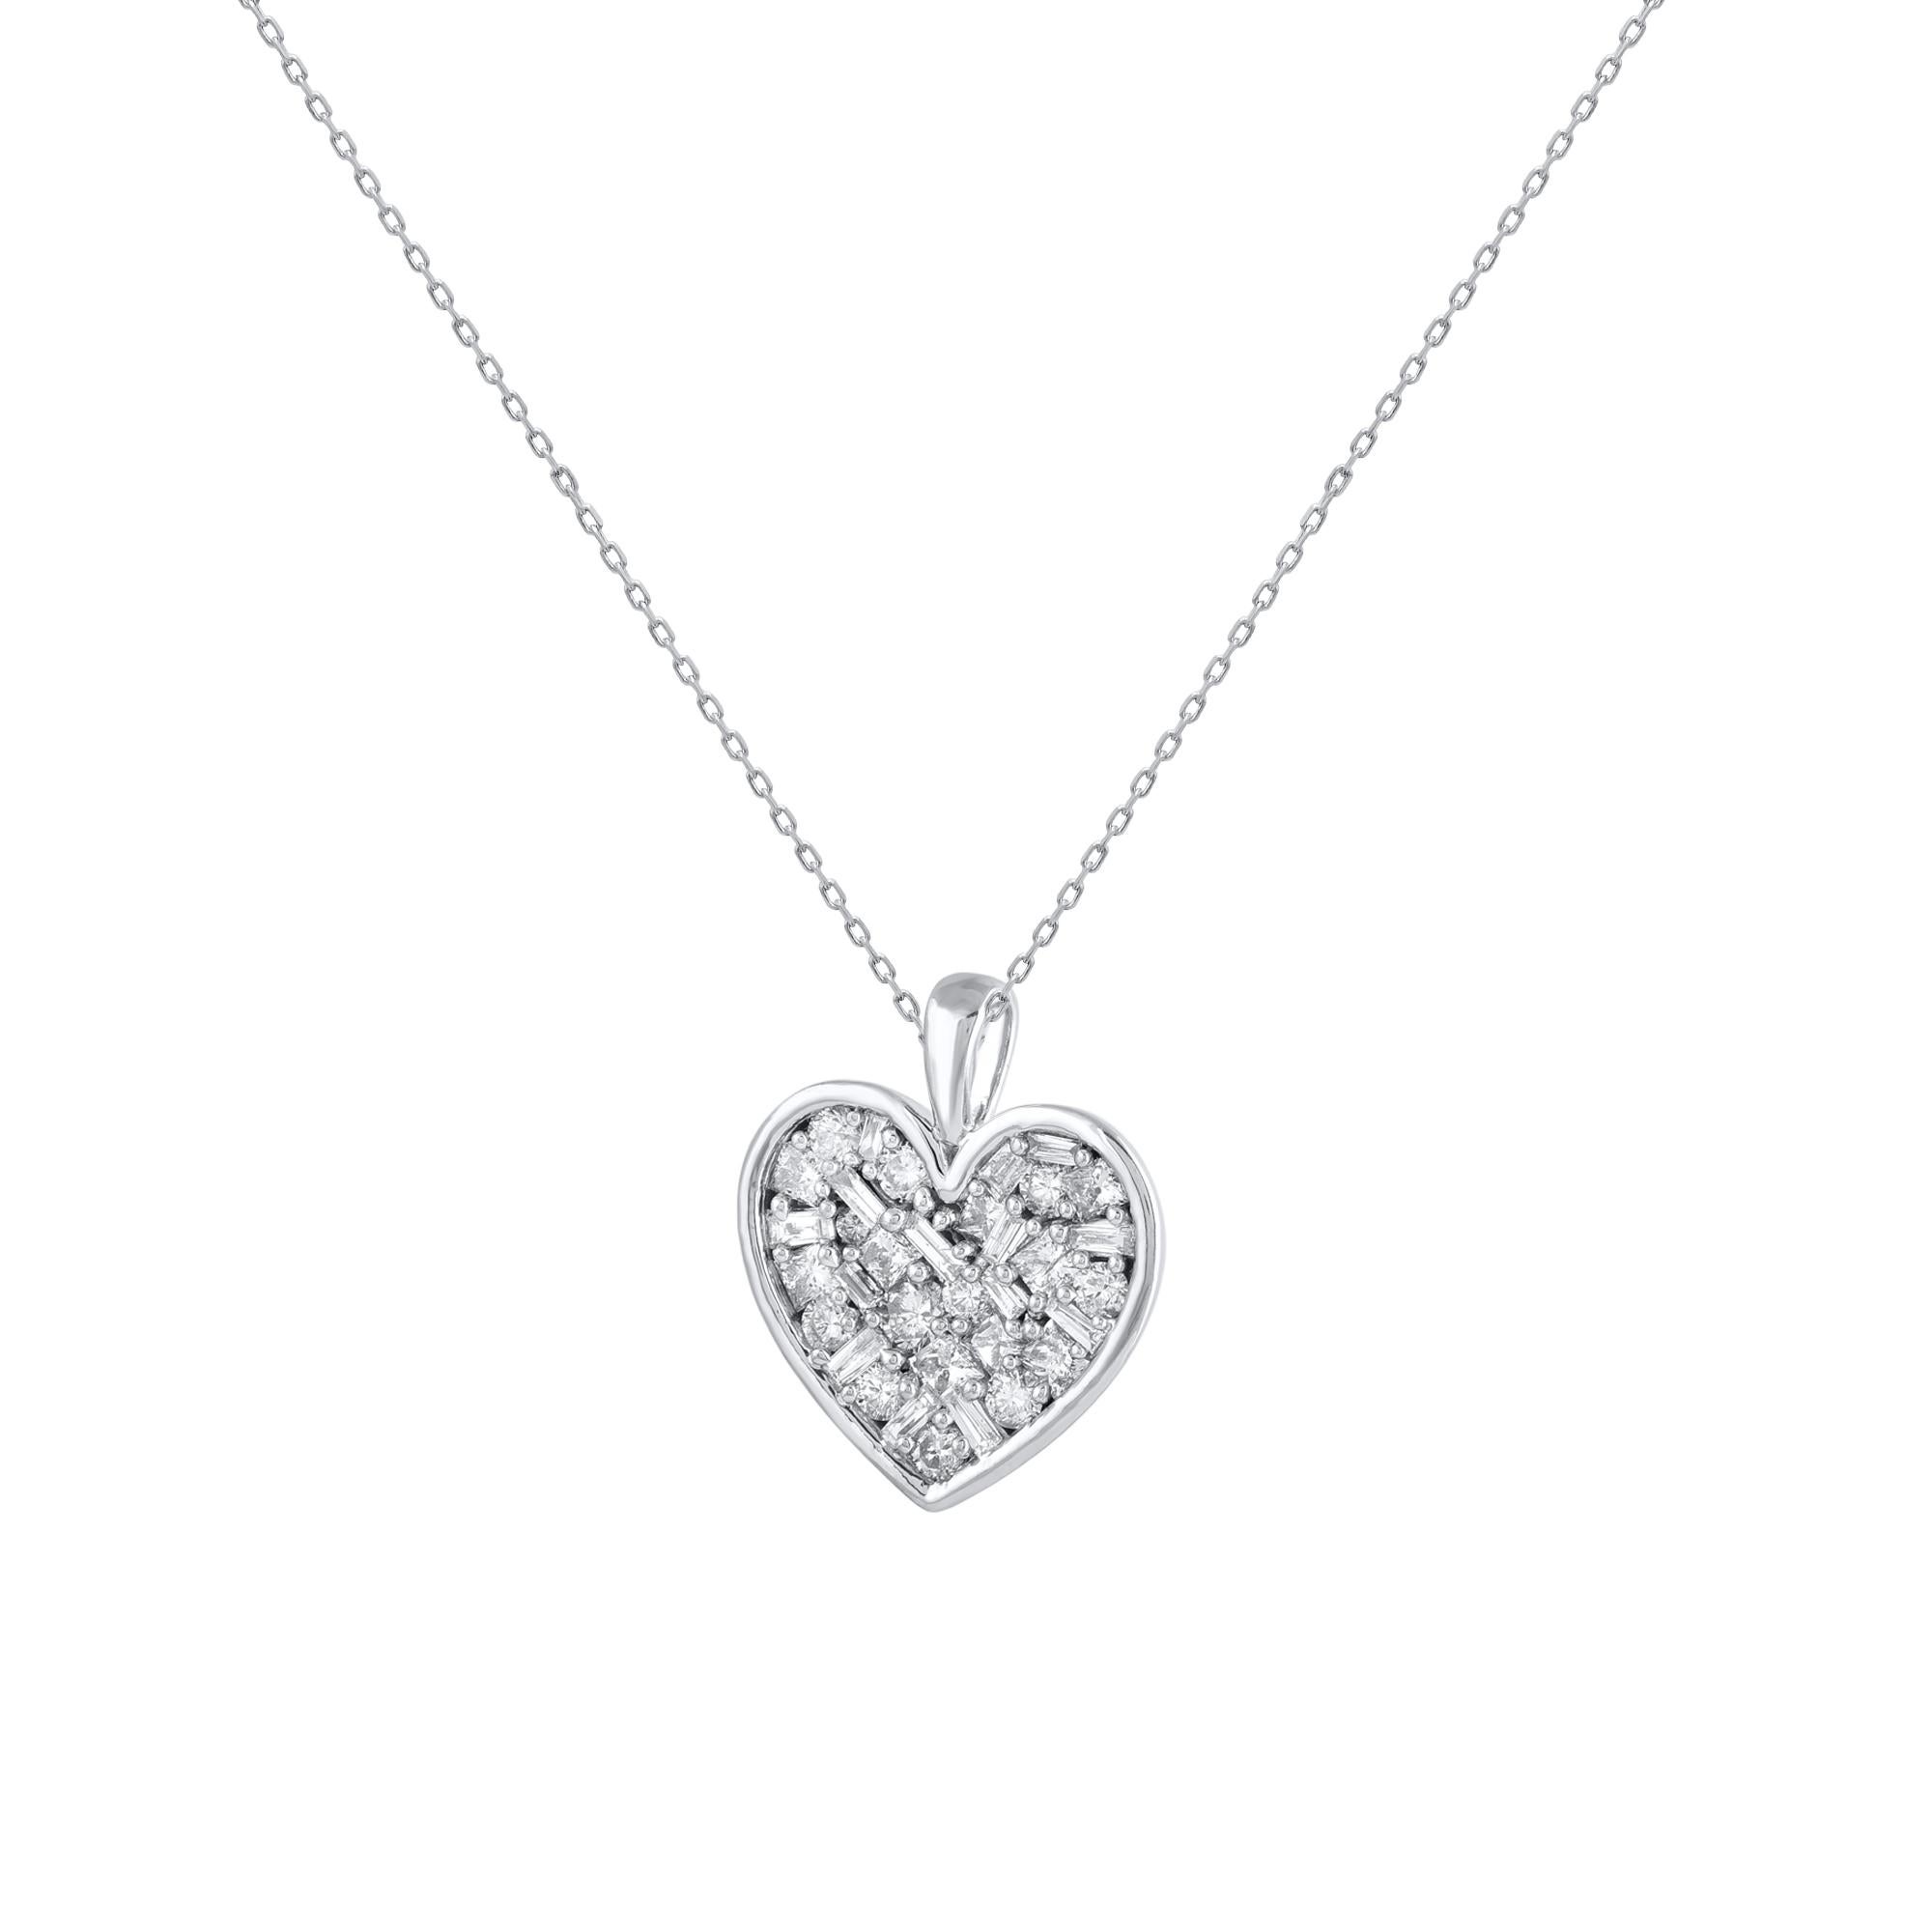 This classic diamond heart is a perfect anytime addition to her wardrobe. These heart pendant are studded with 34 princess cut, brilliant cut & baguette natural diamonds in prong setting. crafted in 14 karat white gold. Diamonds are graded as H-I